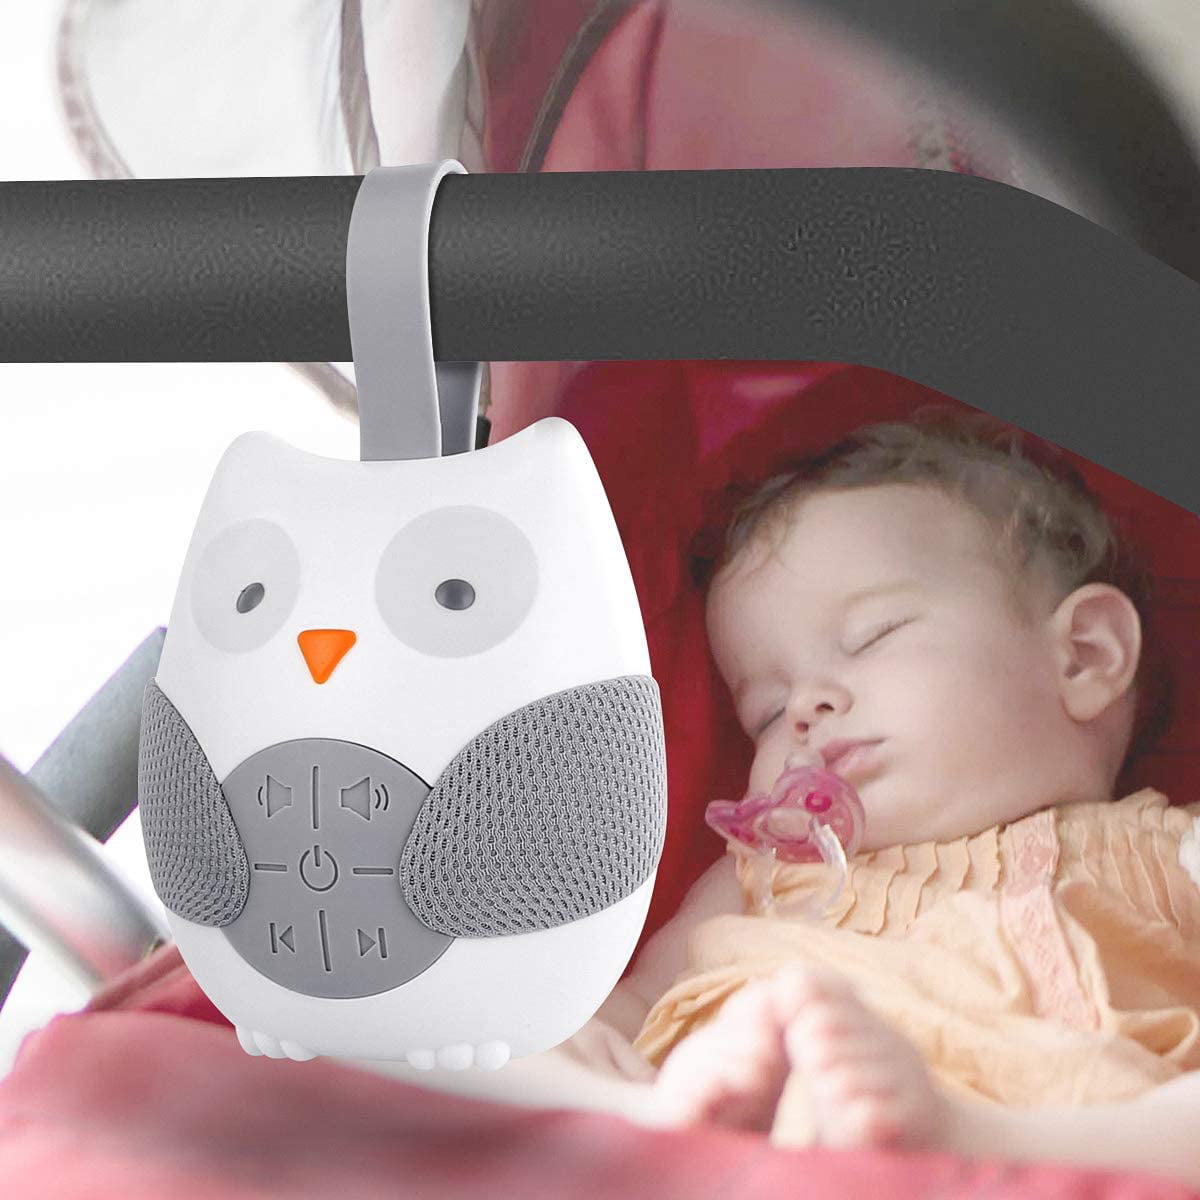 Baby Sleep Pacifier Sound Machine Portable White Noise Noise Machine with 12 Soothing Sounds And 3 Shusher Timers for Traveling Sleeping Baby Carriage